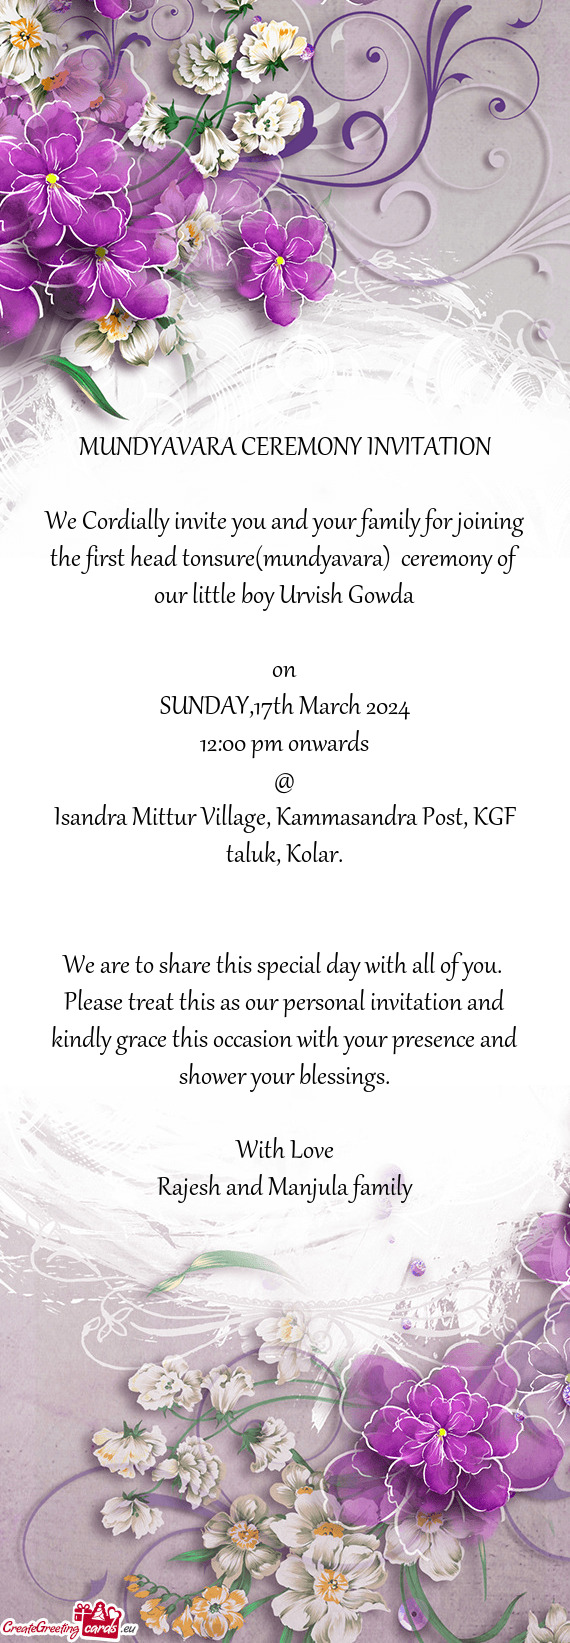 We Cordially invite you and your family for joining the first head tonsure(mundyavara) ceremony of